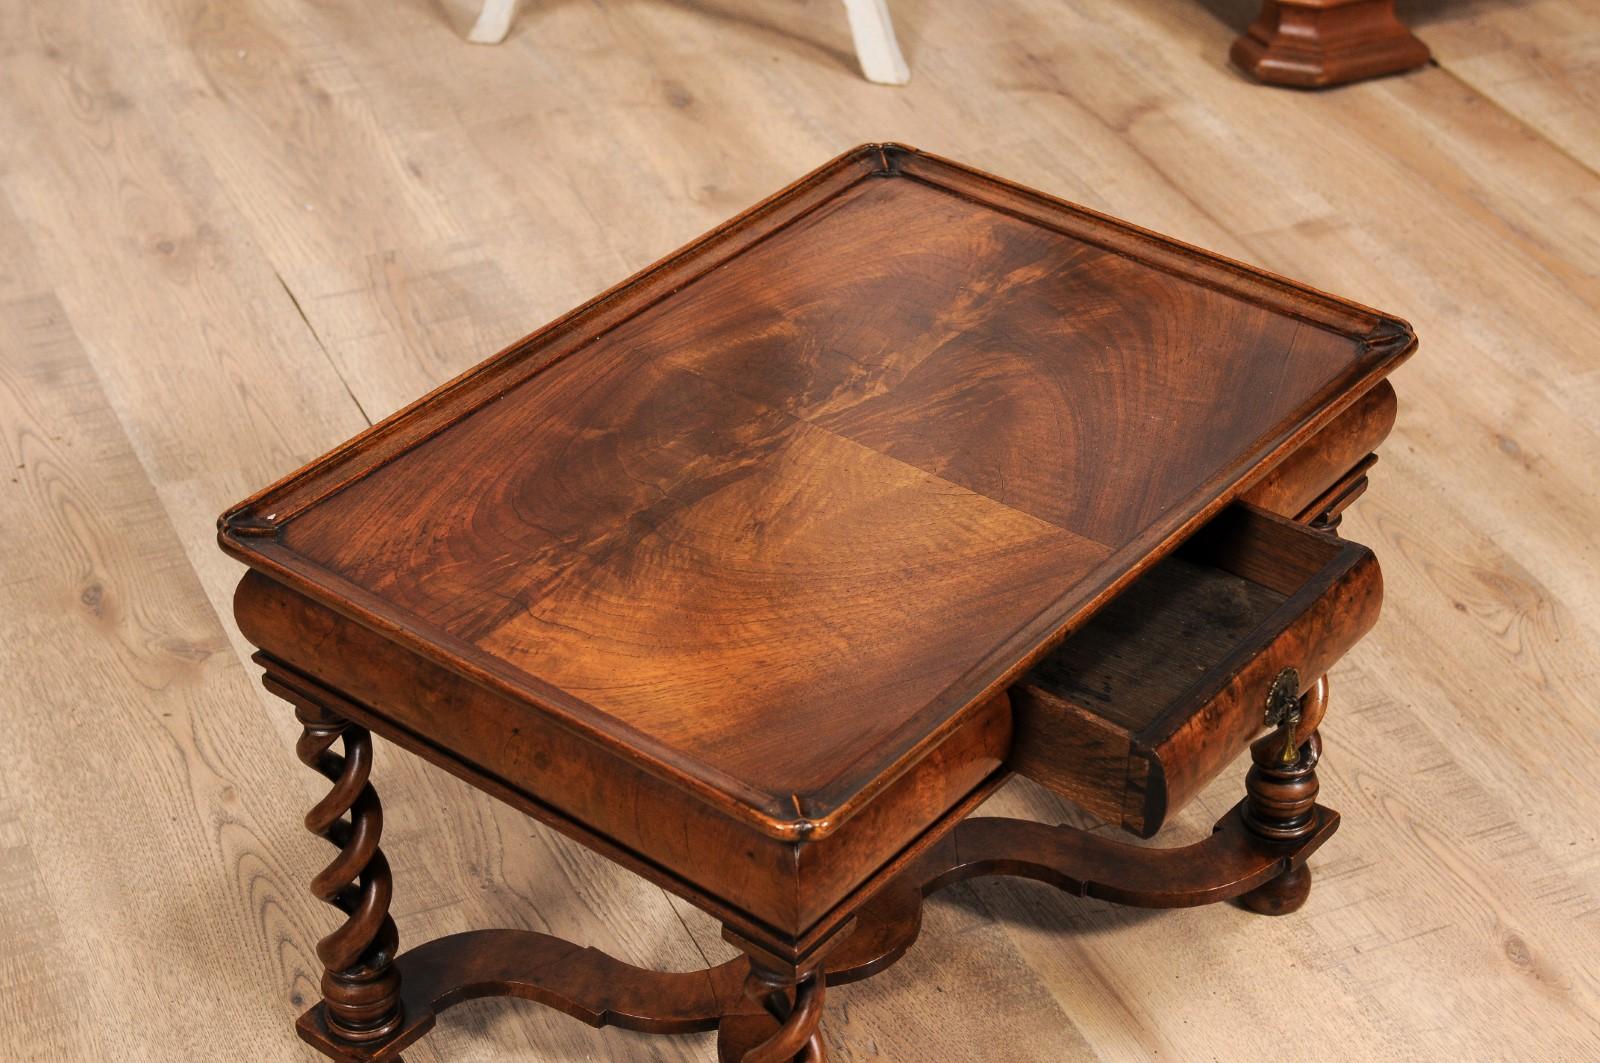 20th Century English Queen Anne Style 1910 Burl Walnut Coffee Table with Bookmatched Tray Top For Sale